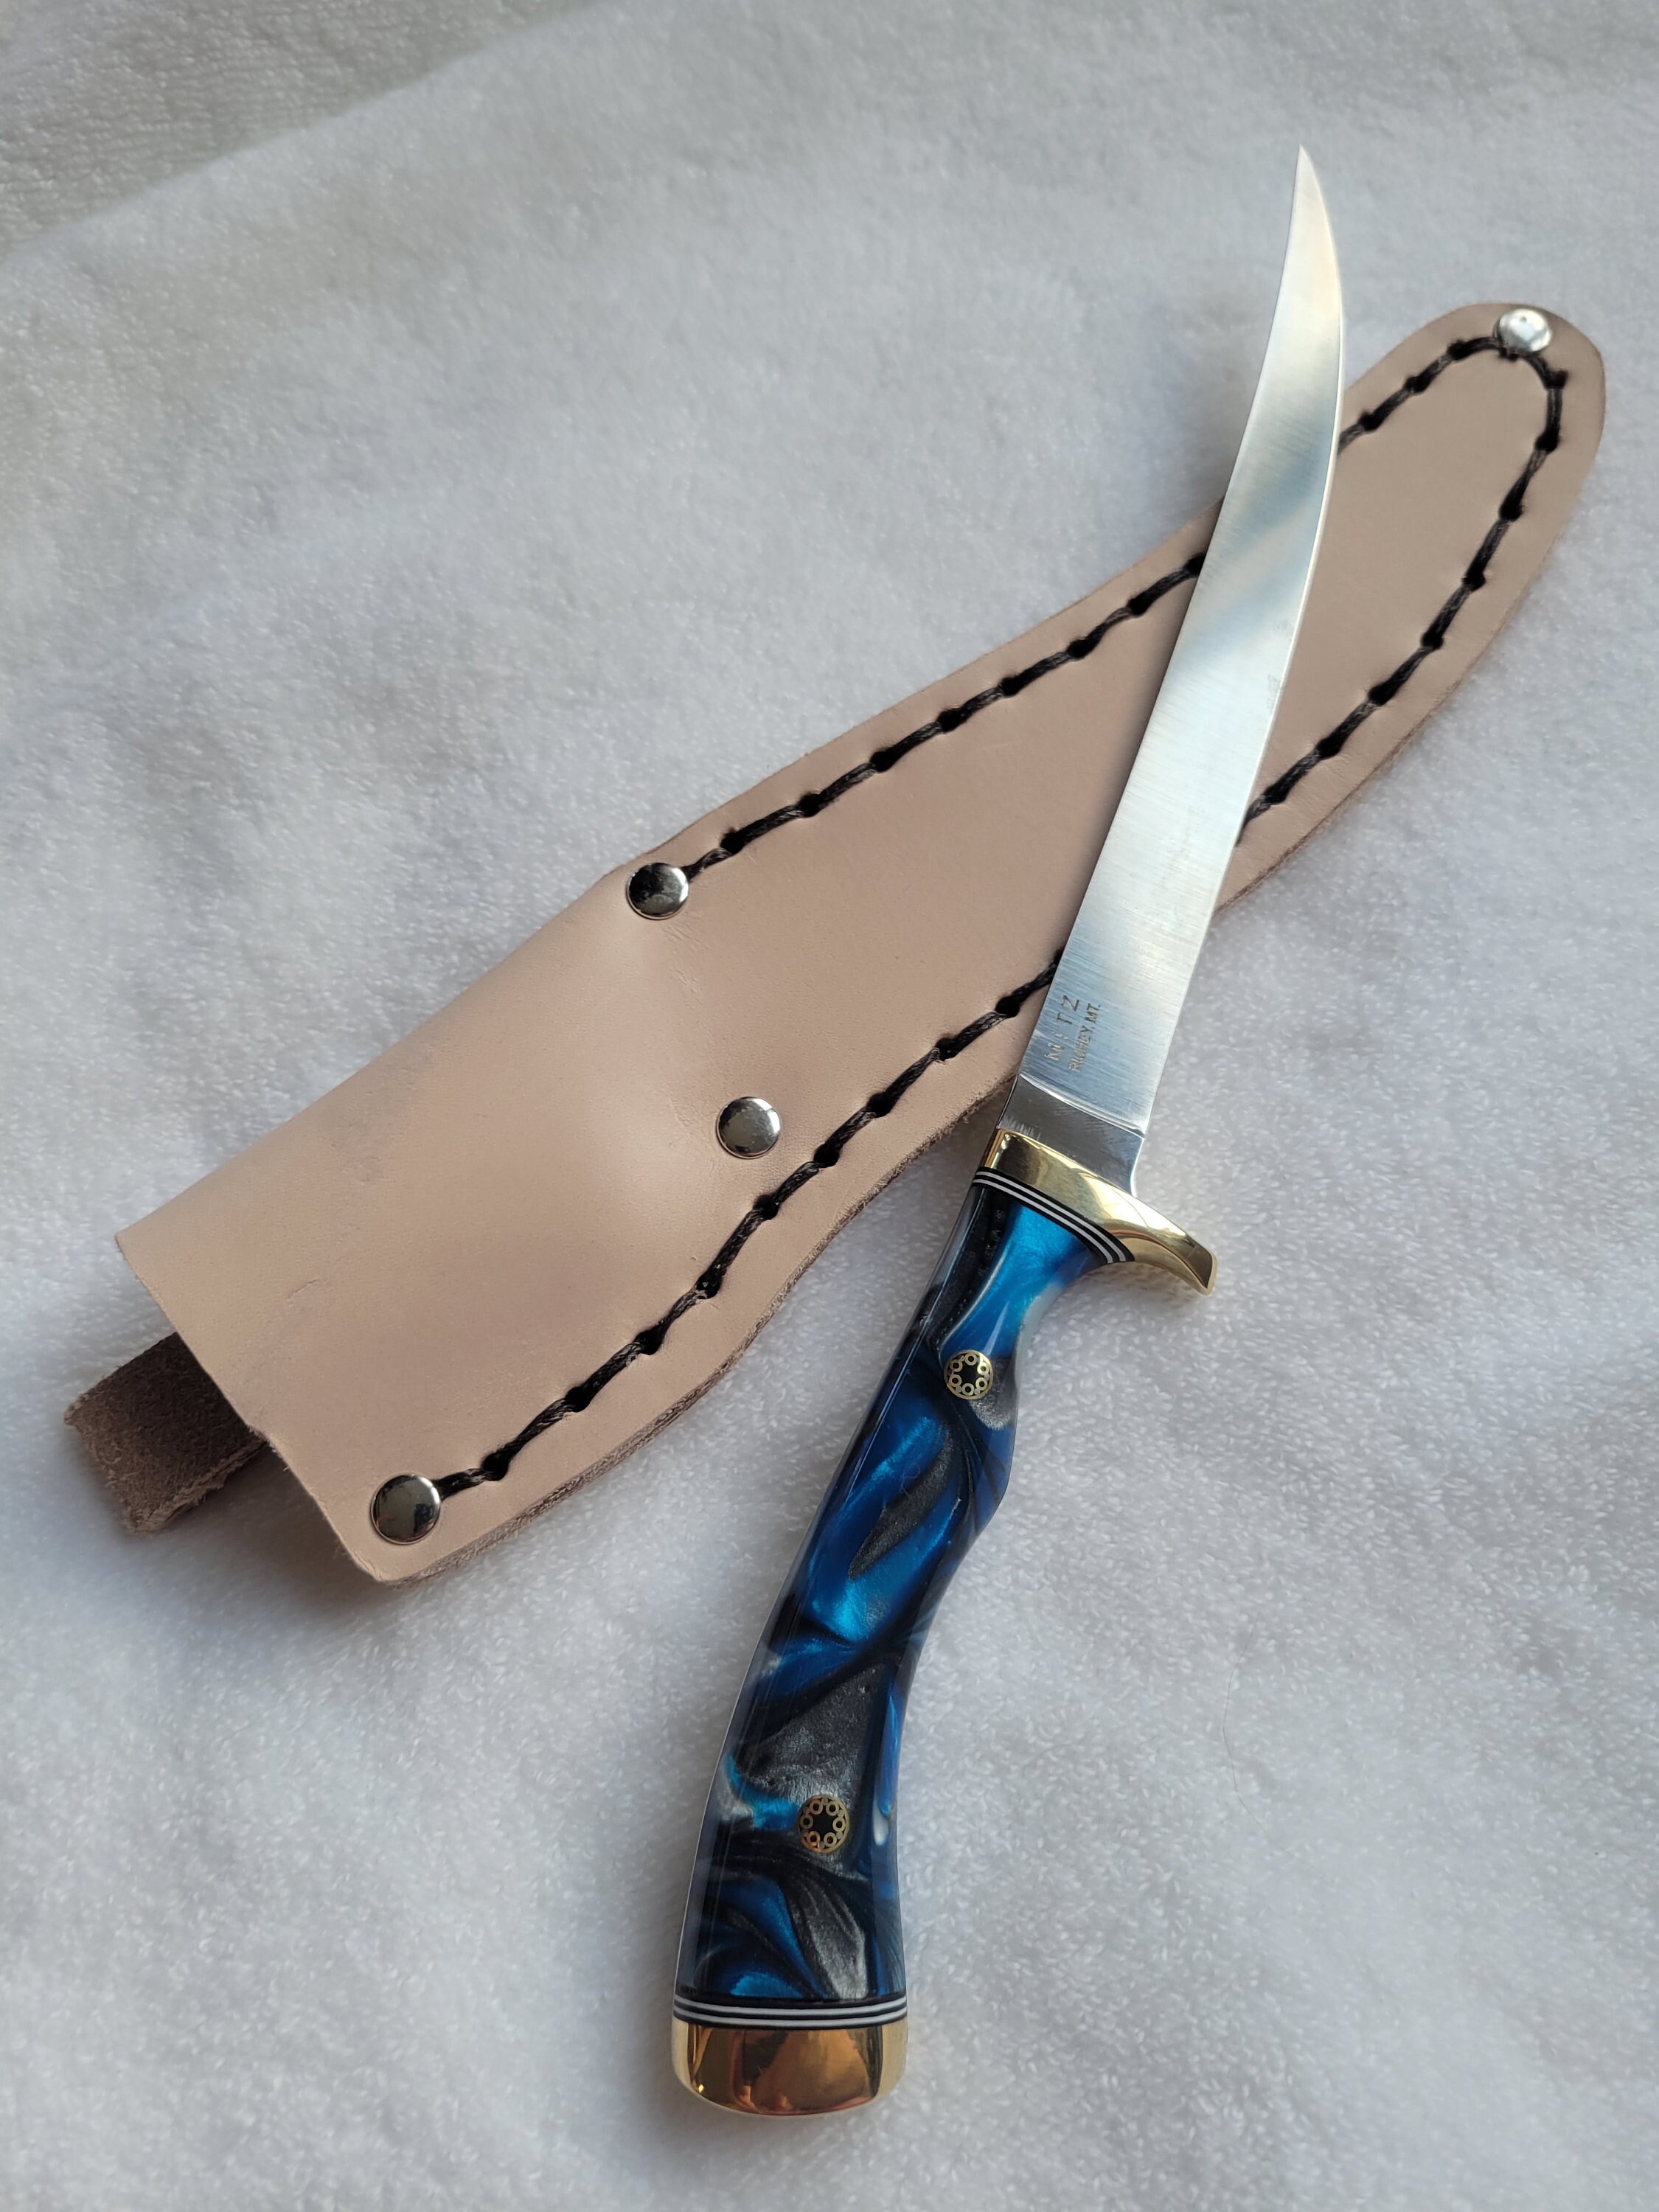 Handmade fillet knife with stainless steel blade & leather scabbard